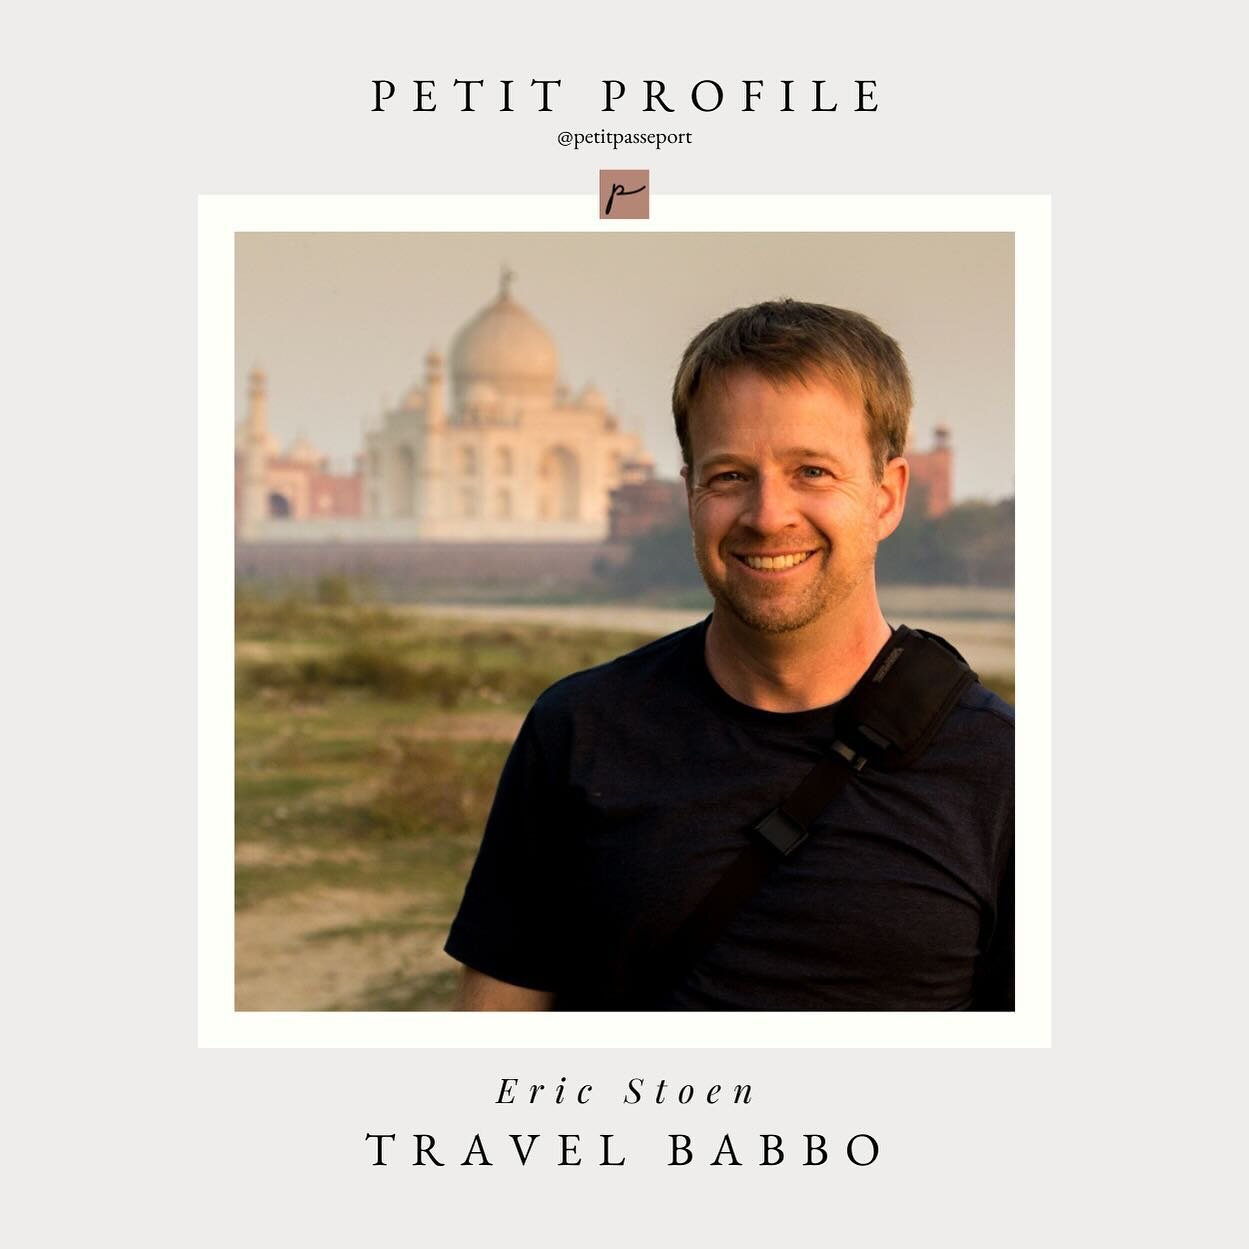 P E T I T  P R O F I L E &bull; C H A R T I N G  N E W  H O R I Z O N S

As we continue our TFD world tour, travel expert and dad of three, Eric Stoen of&nbsp;@travelbabbo and @familytravel, shares his reflections on a travel-filled life.

In our lat